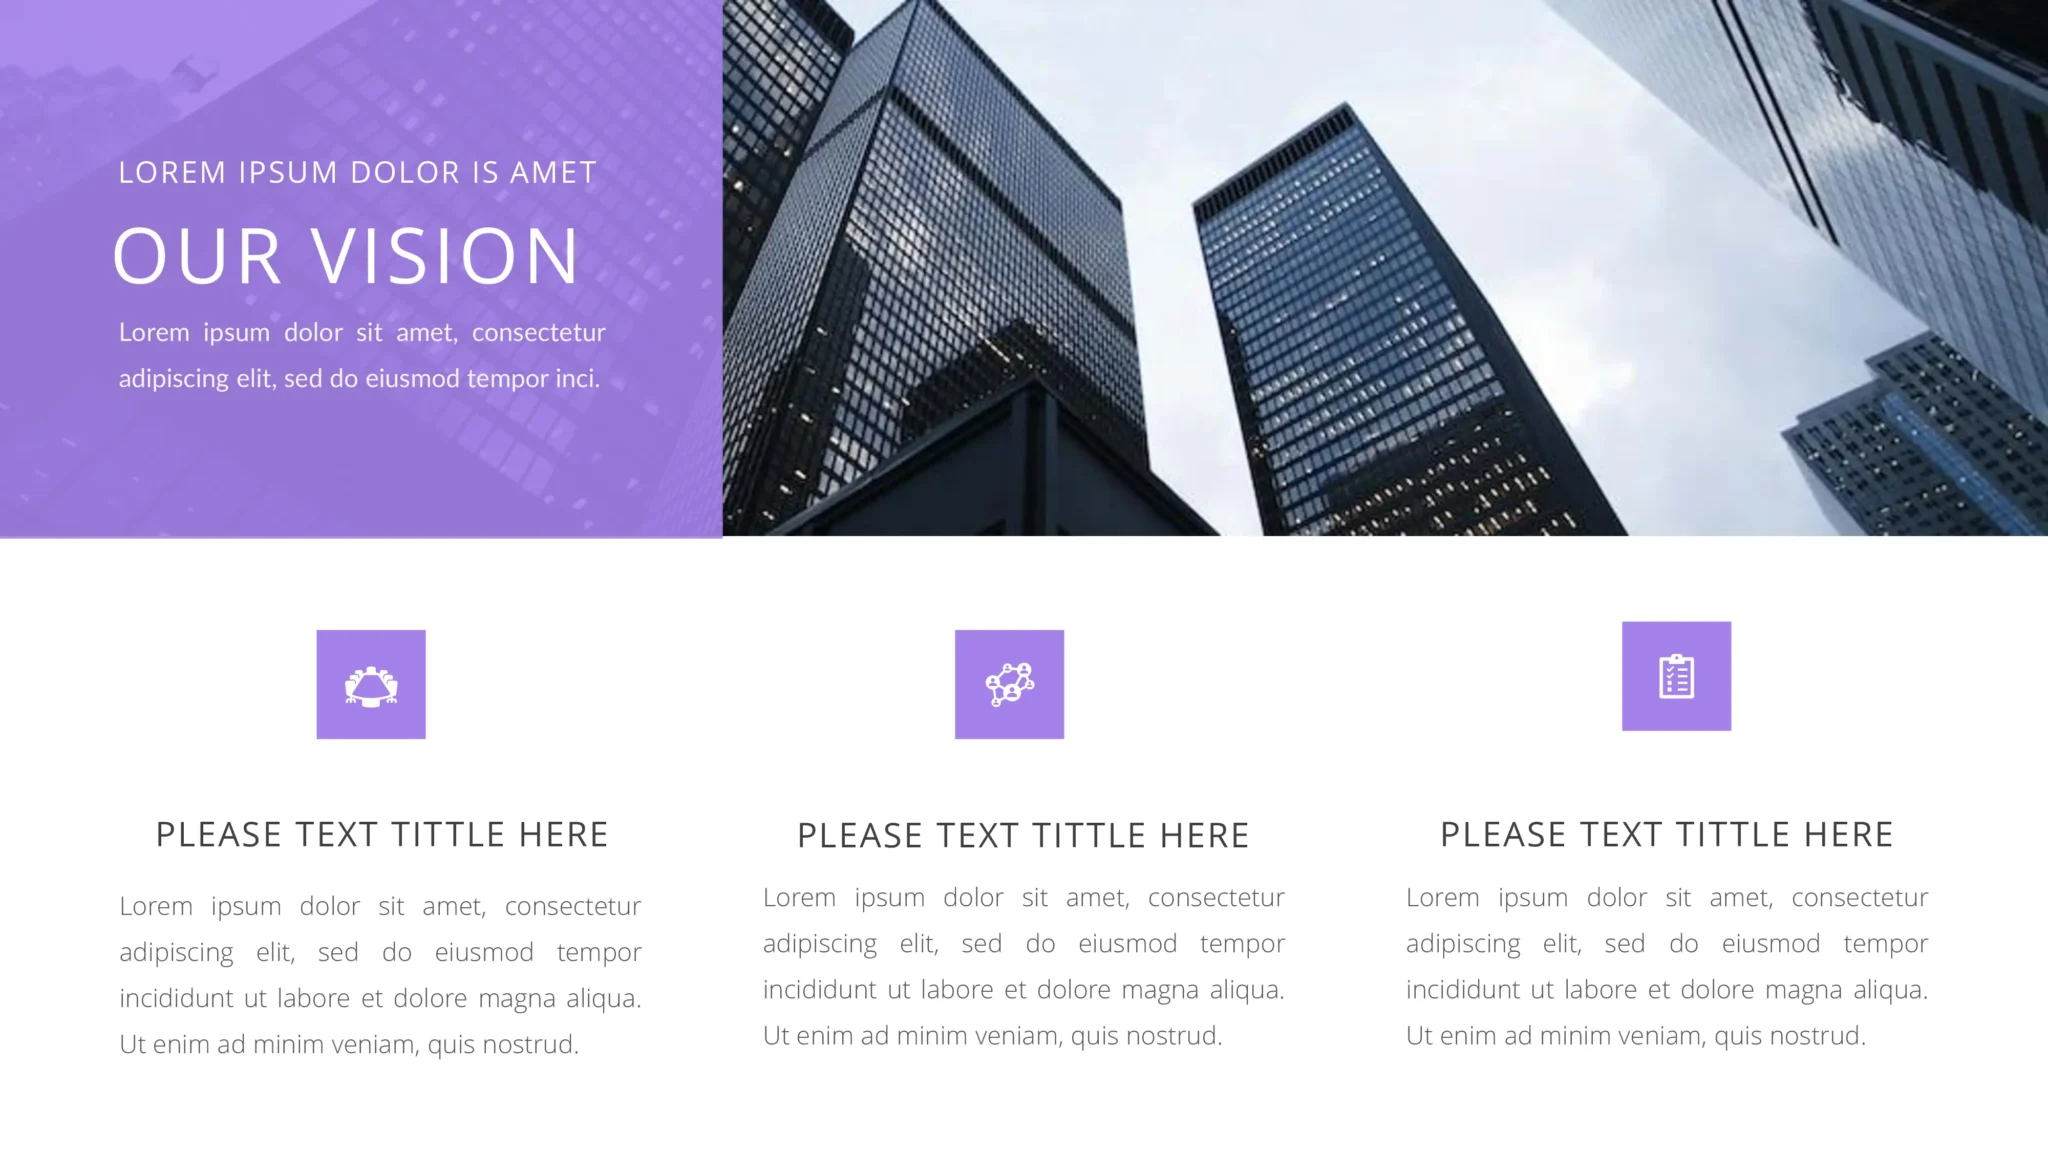 Clear 'Our Vision' presentation templates featuring company front and compelling content.